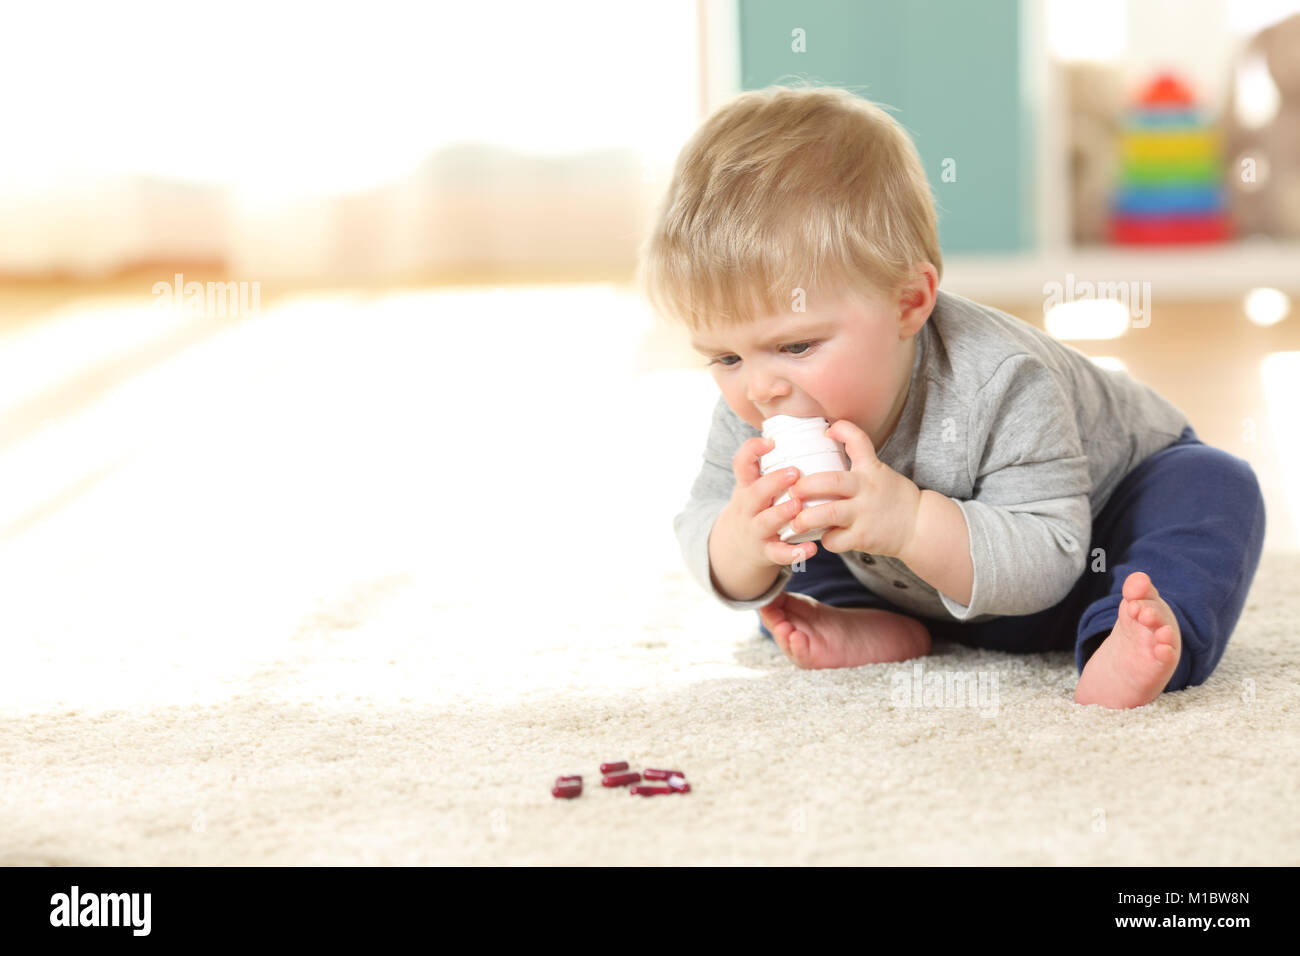 Baby in danger playing with a bottle of medicines on the floor at home Stock Photo